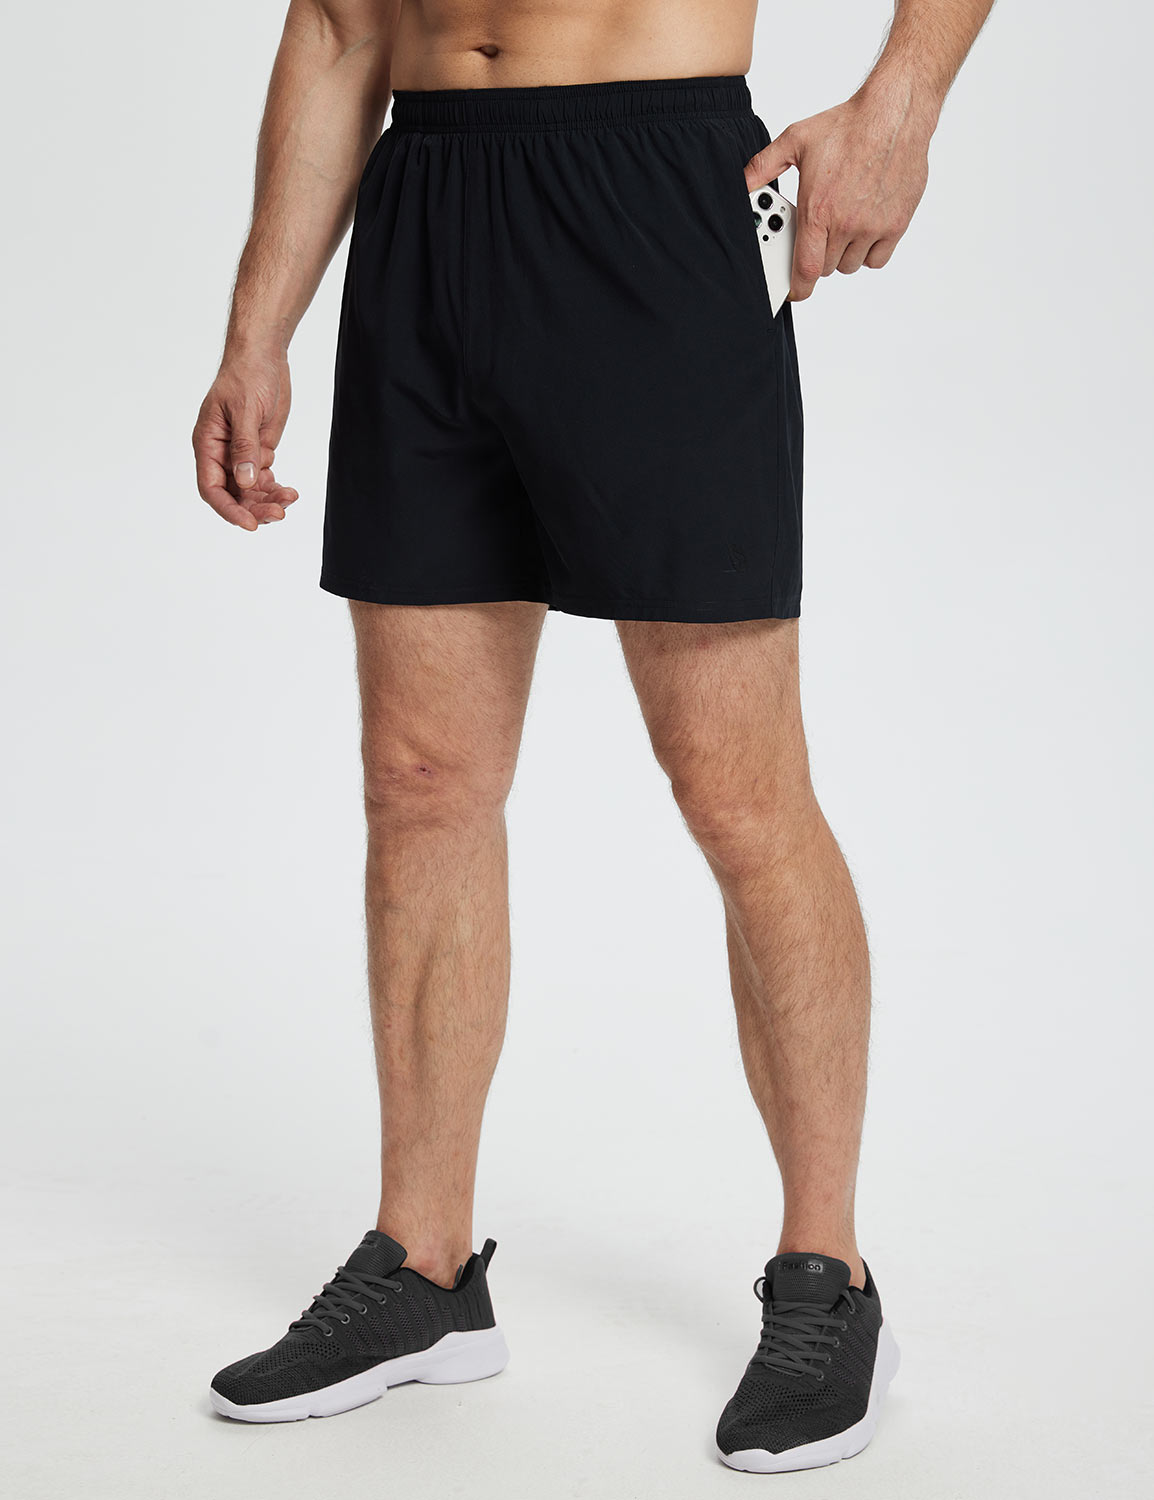 Baleaf Men's Sustainable 5" 2-in-1 Shorts dbd052 Anthracite Side